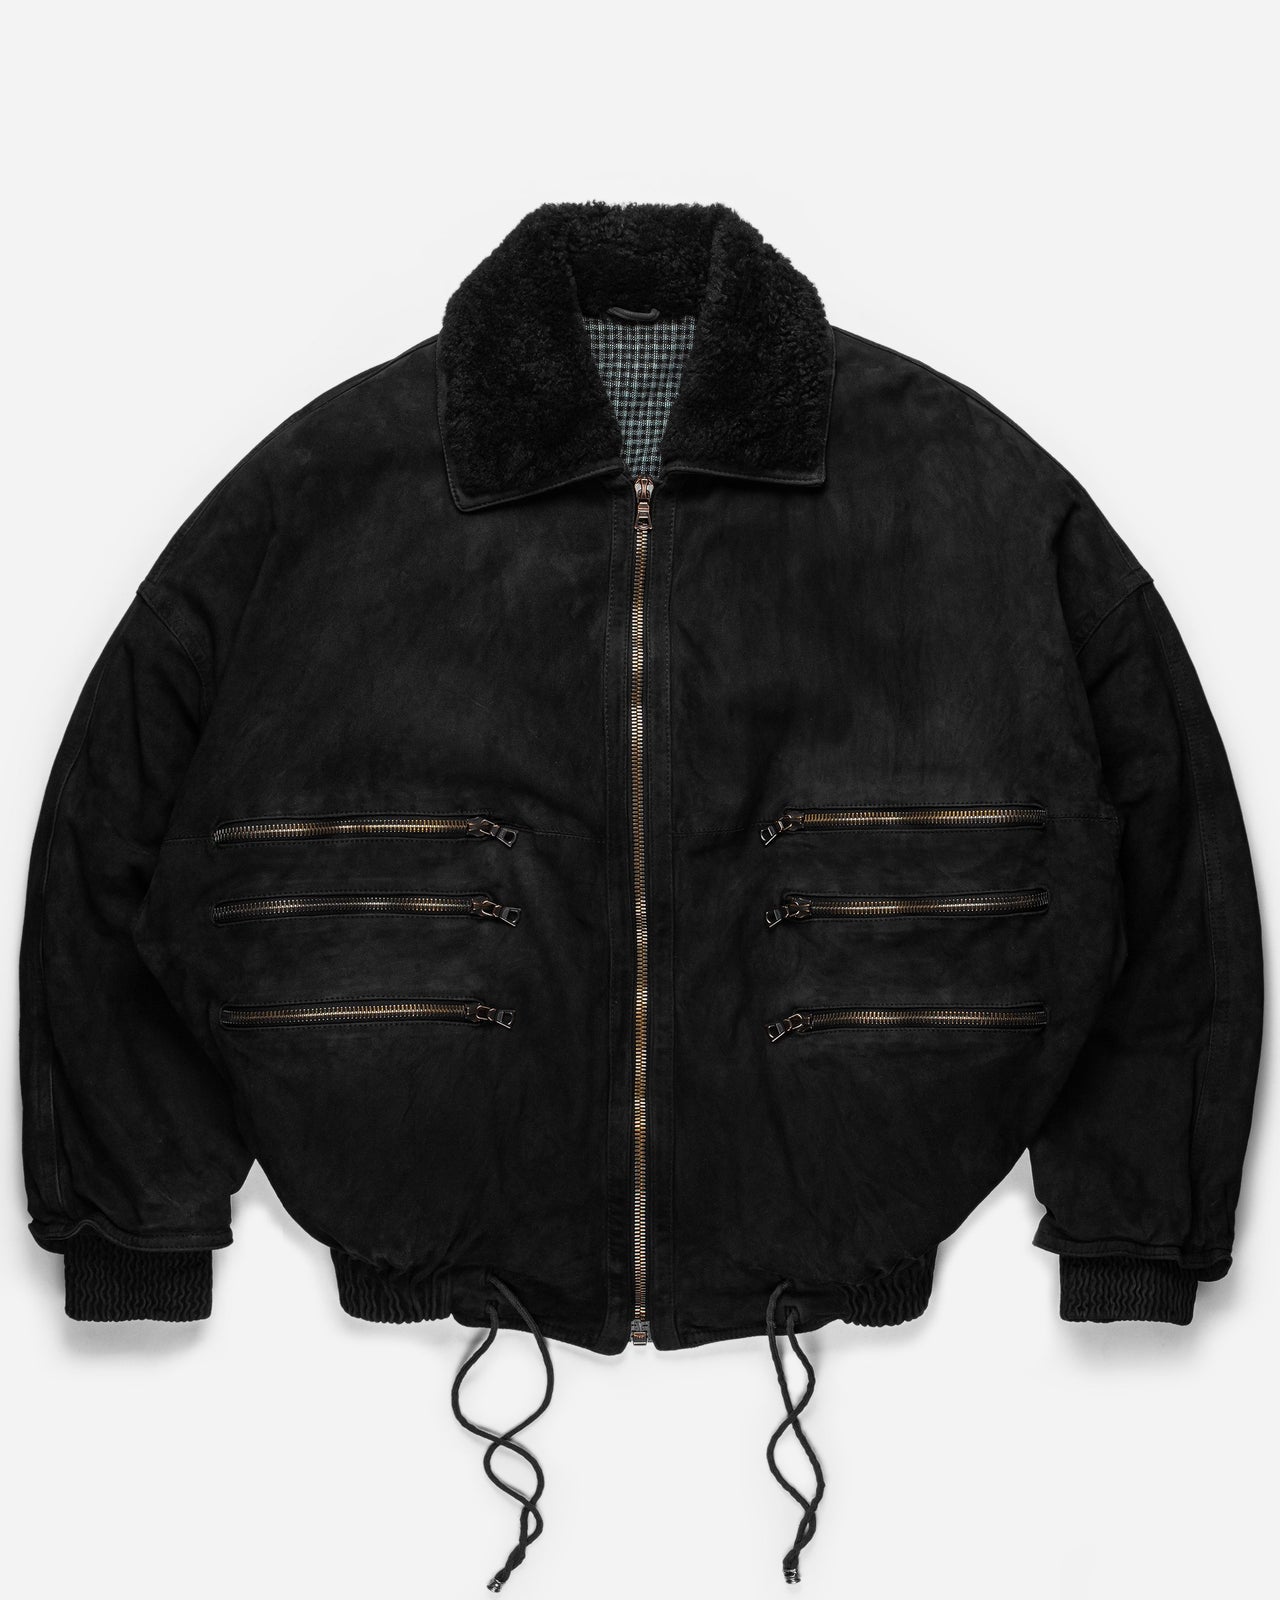 Gucci by Tom Ford Reversible Linen Bomber - SILVER LEAGUE